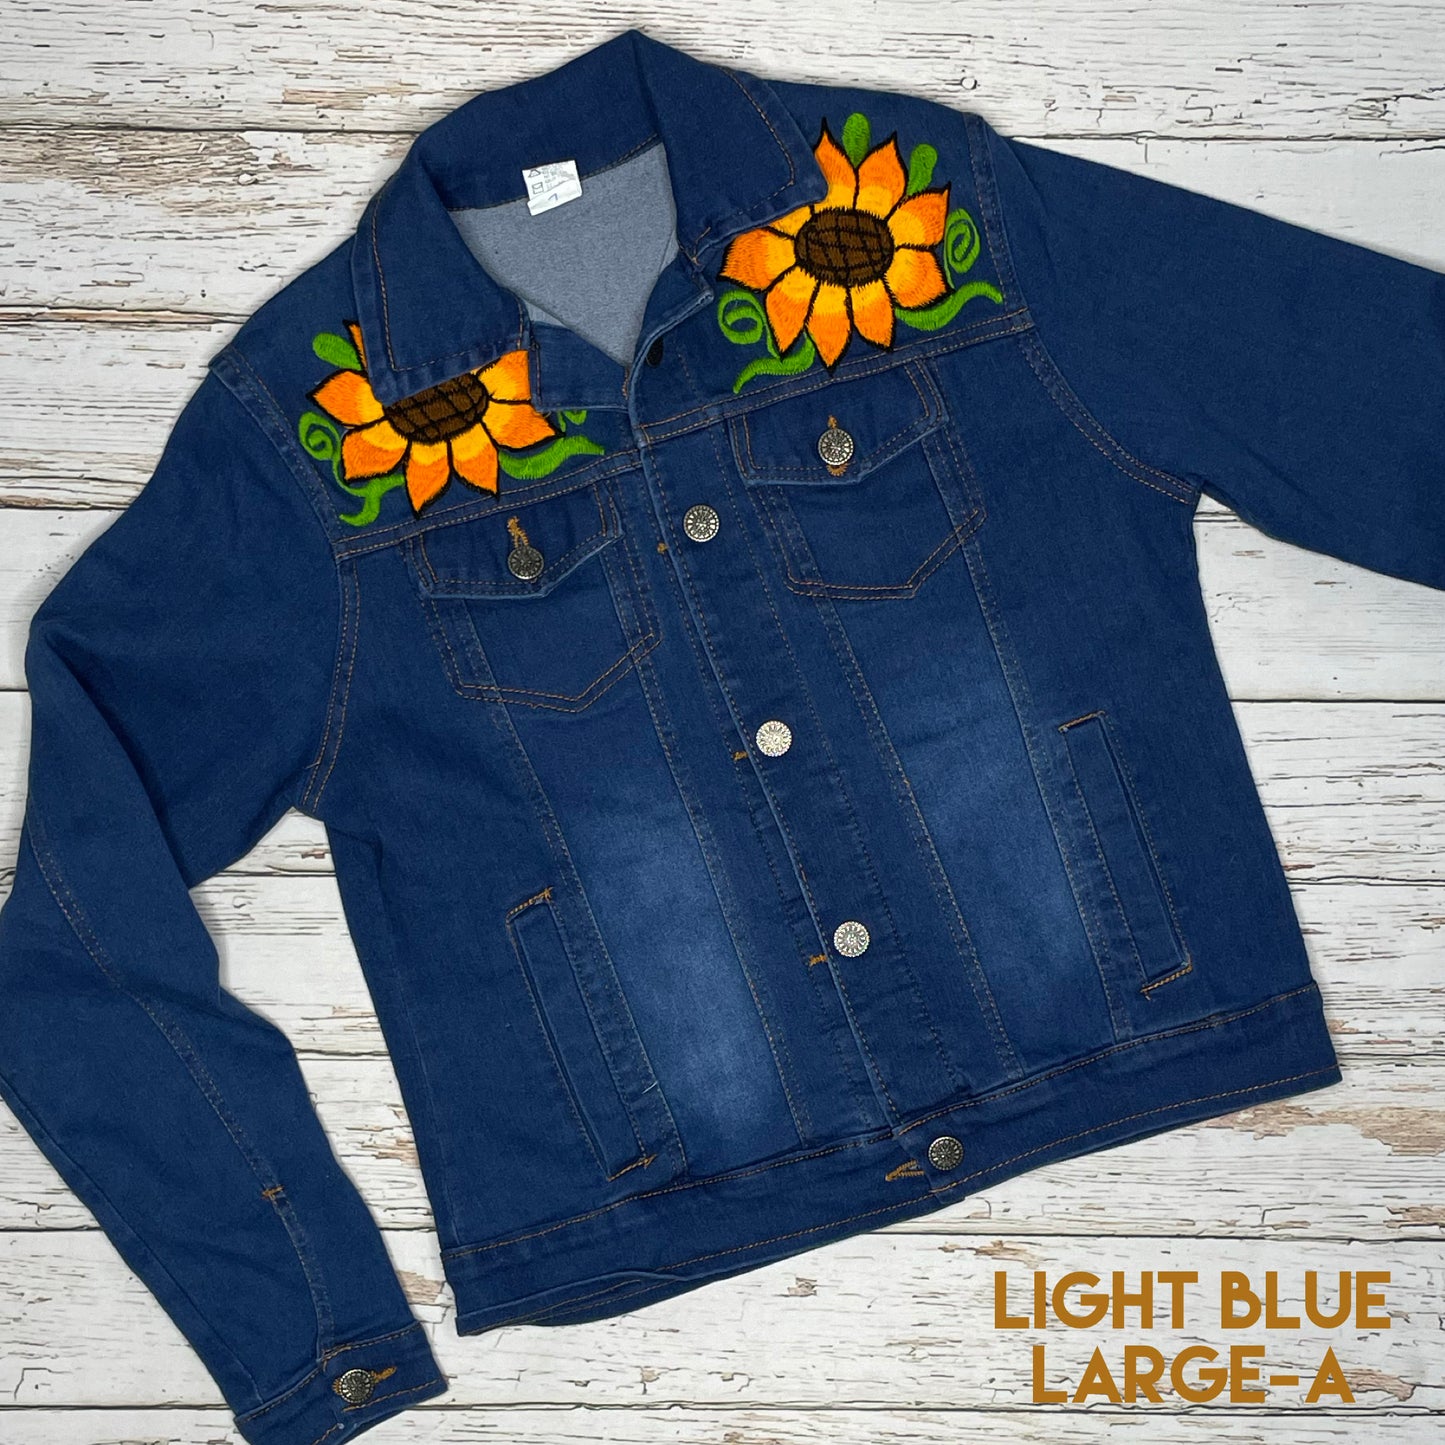 Mexican Embroidered Denim Jacket - Sunflowers